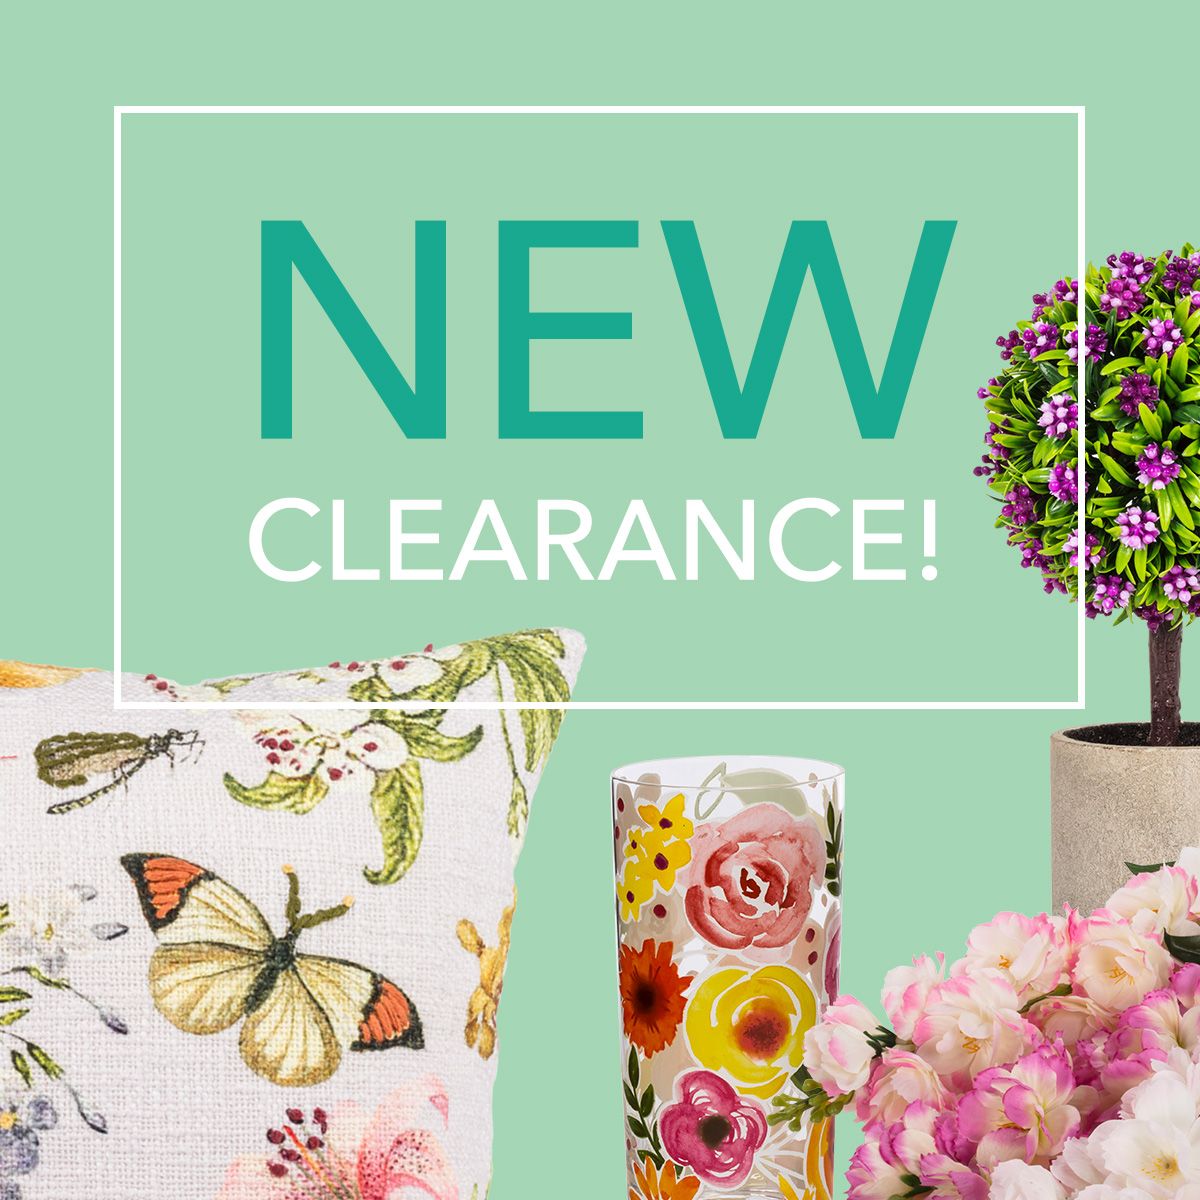 New Clearance just dropped! Limited stock, big savings! Stock up on fabulous décor, tableware and accessories at unbeatable prices. Don’t miss out on this huge sale! ✨️😀💛